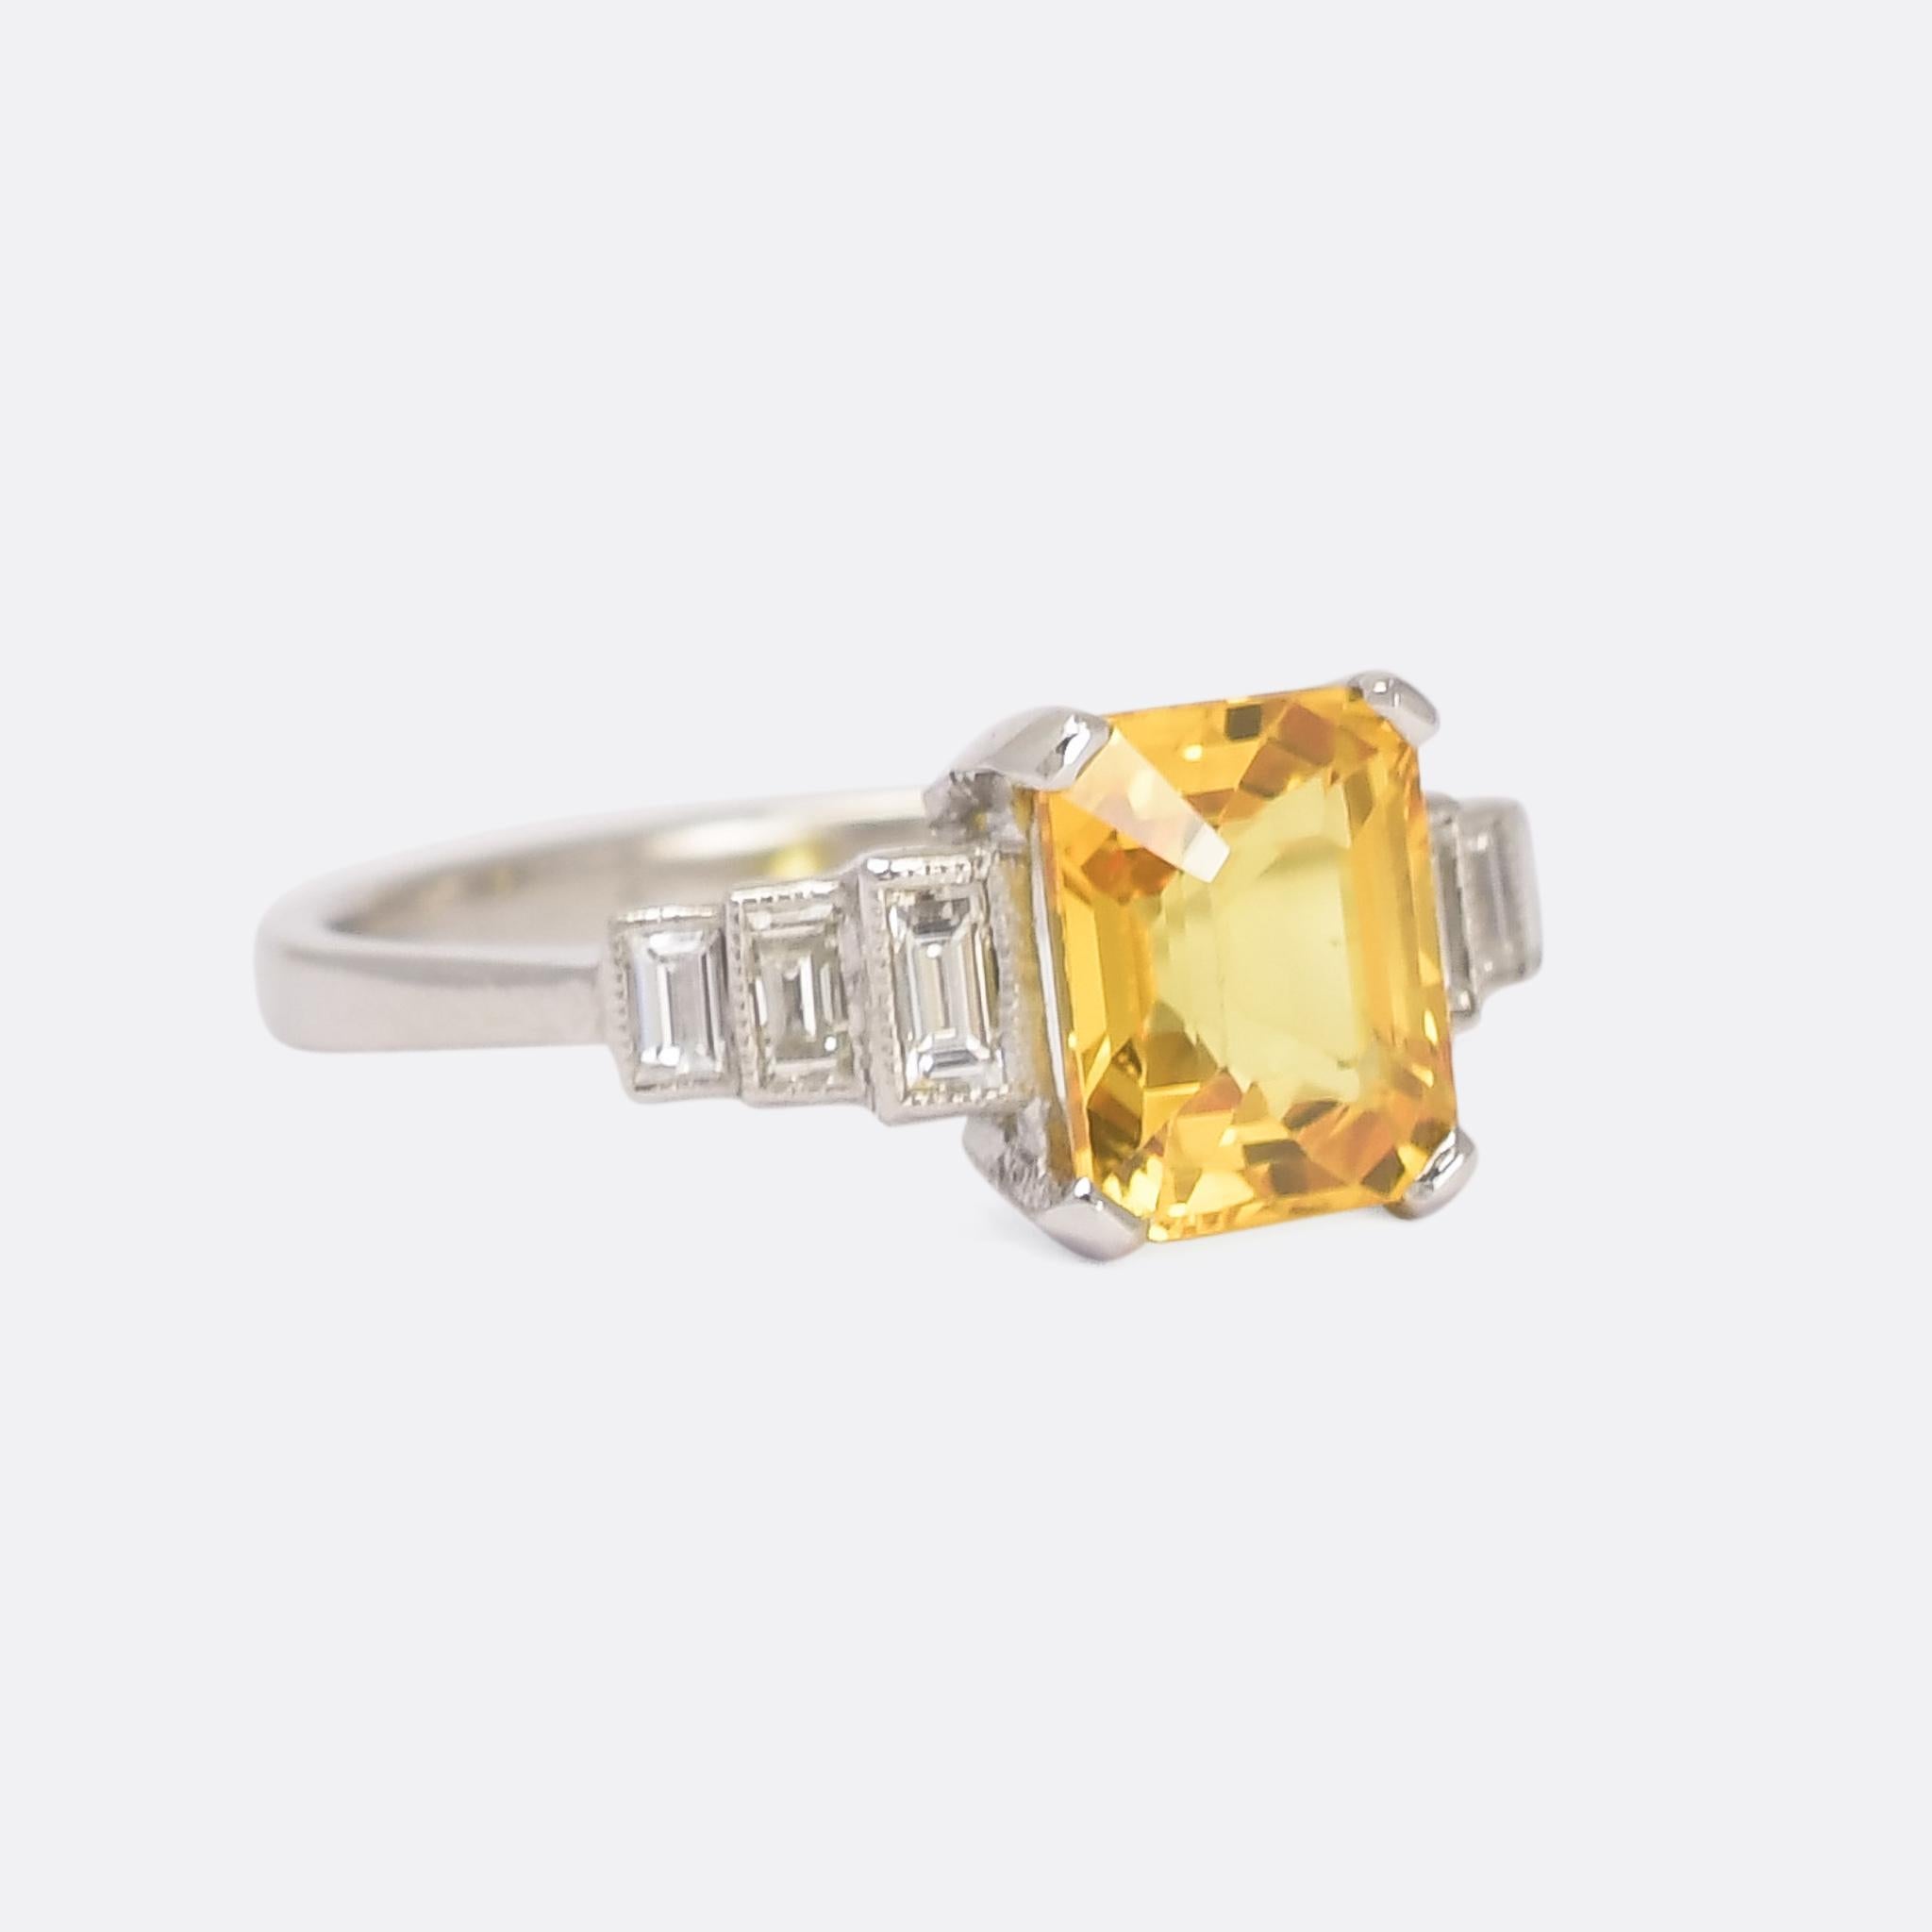 A magnificent Art Deco cocktail ring set with a 2.5 carat emerald cut yellow sapphire flanked by stepped baguette diamond shoulders. It's quintessentially Deco in style, modelled in platinum throughout with bold use of colour and diamonds resting in